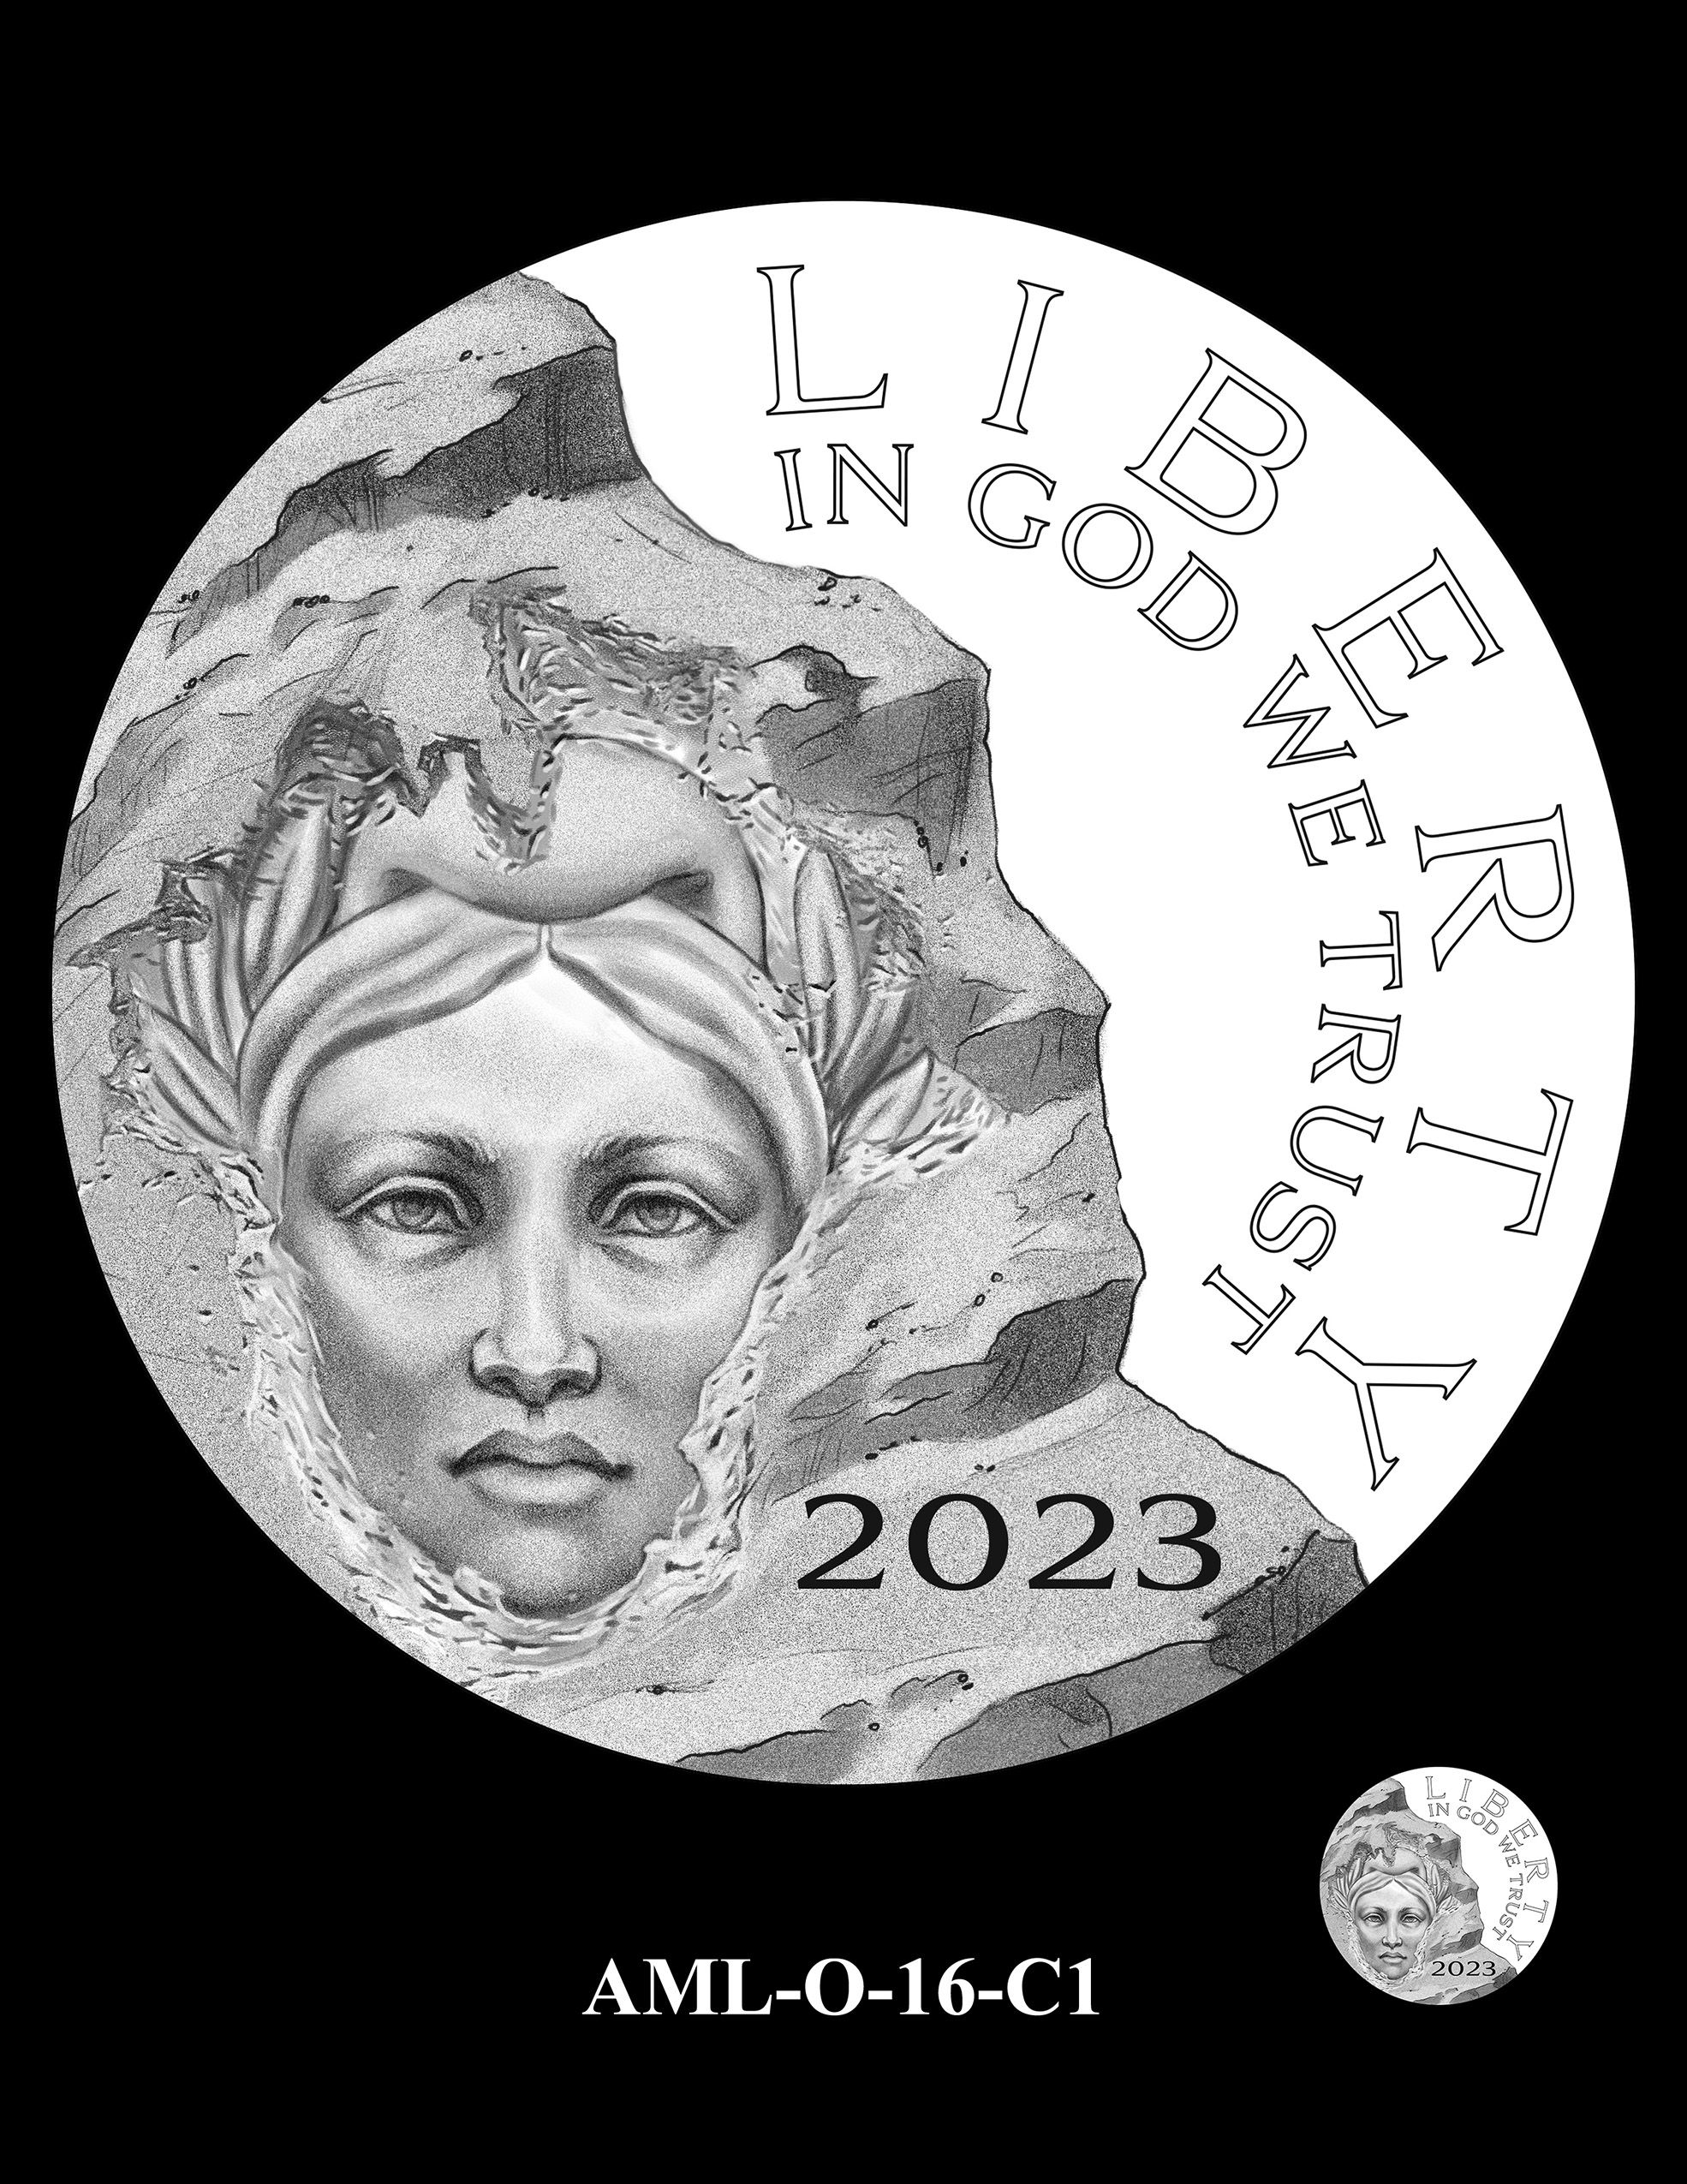 AML-O-16-C1 -- 2023 American Liberty High Relief 24k Gold and Silver Medal Program